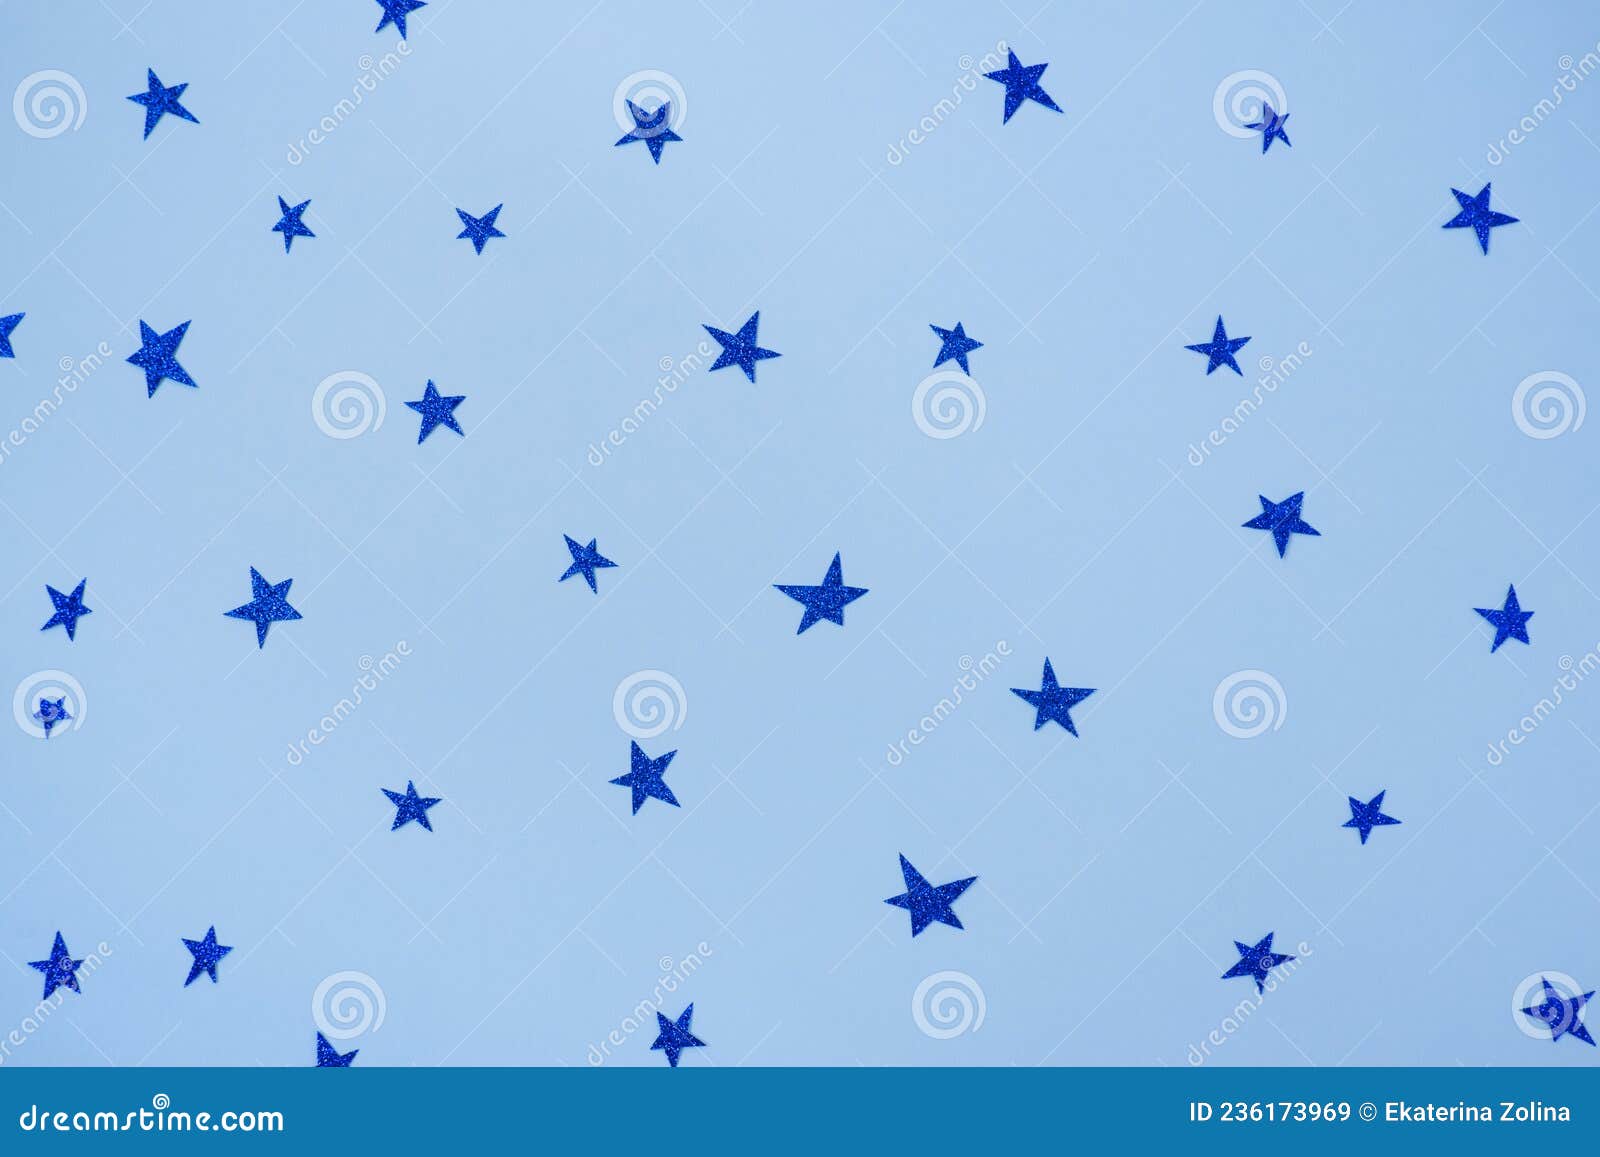 Pale Blue Background with Bright Blue Stars. Sample Stock Image - Image ...